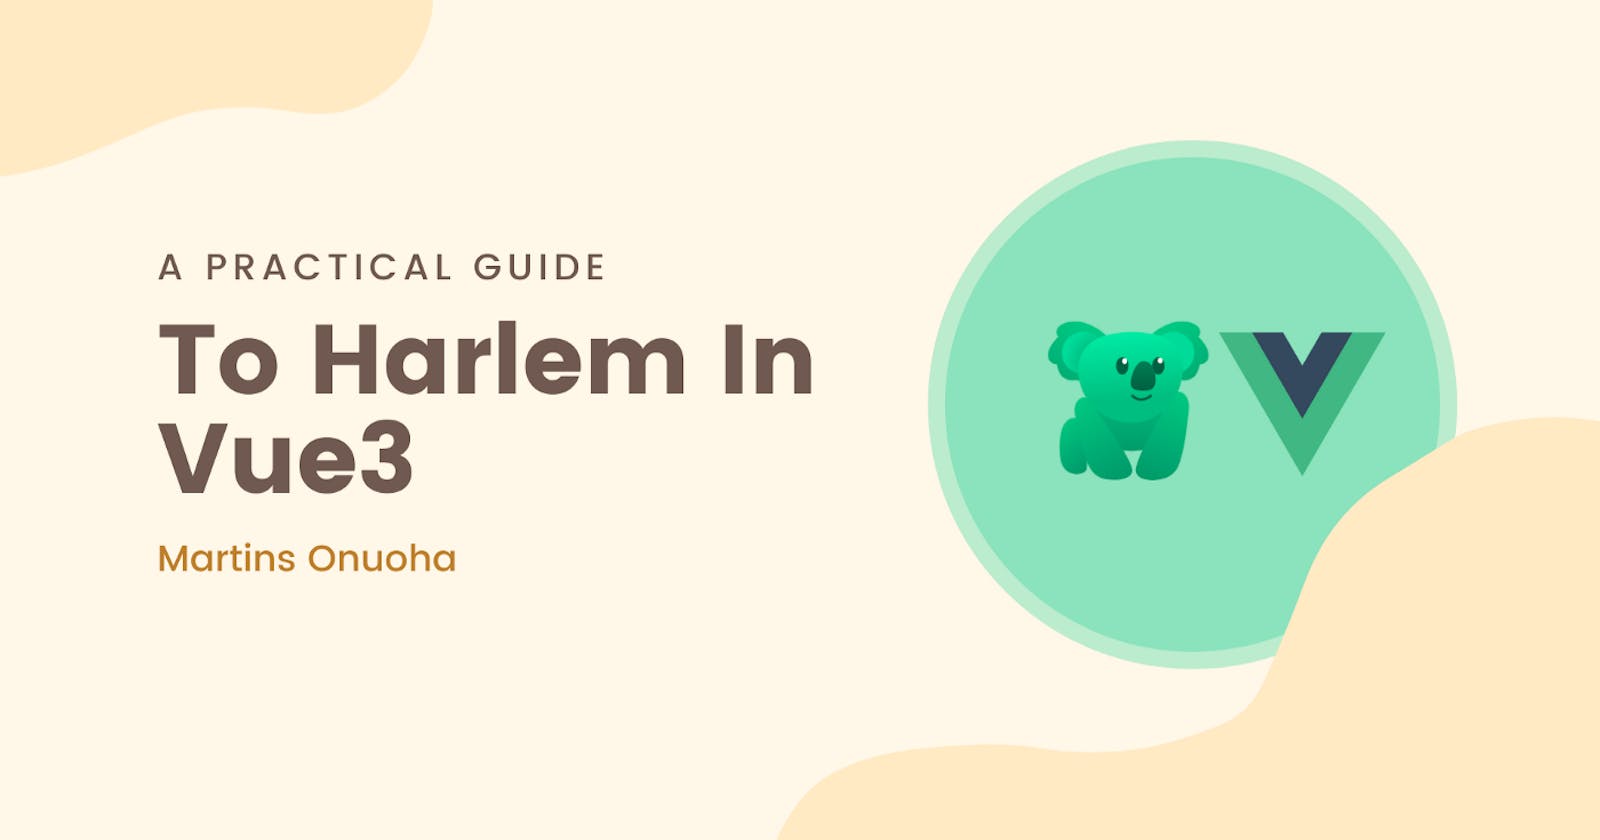 A Practical Guide to Harlem in Vue 3